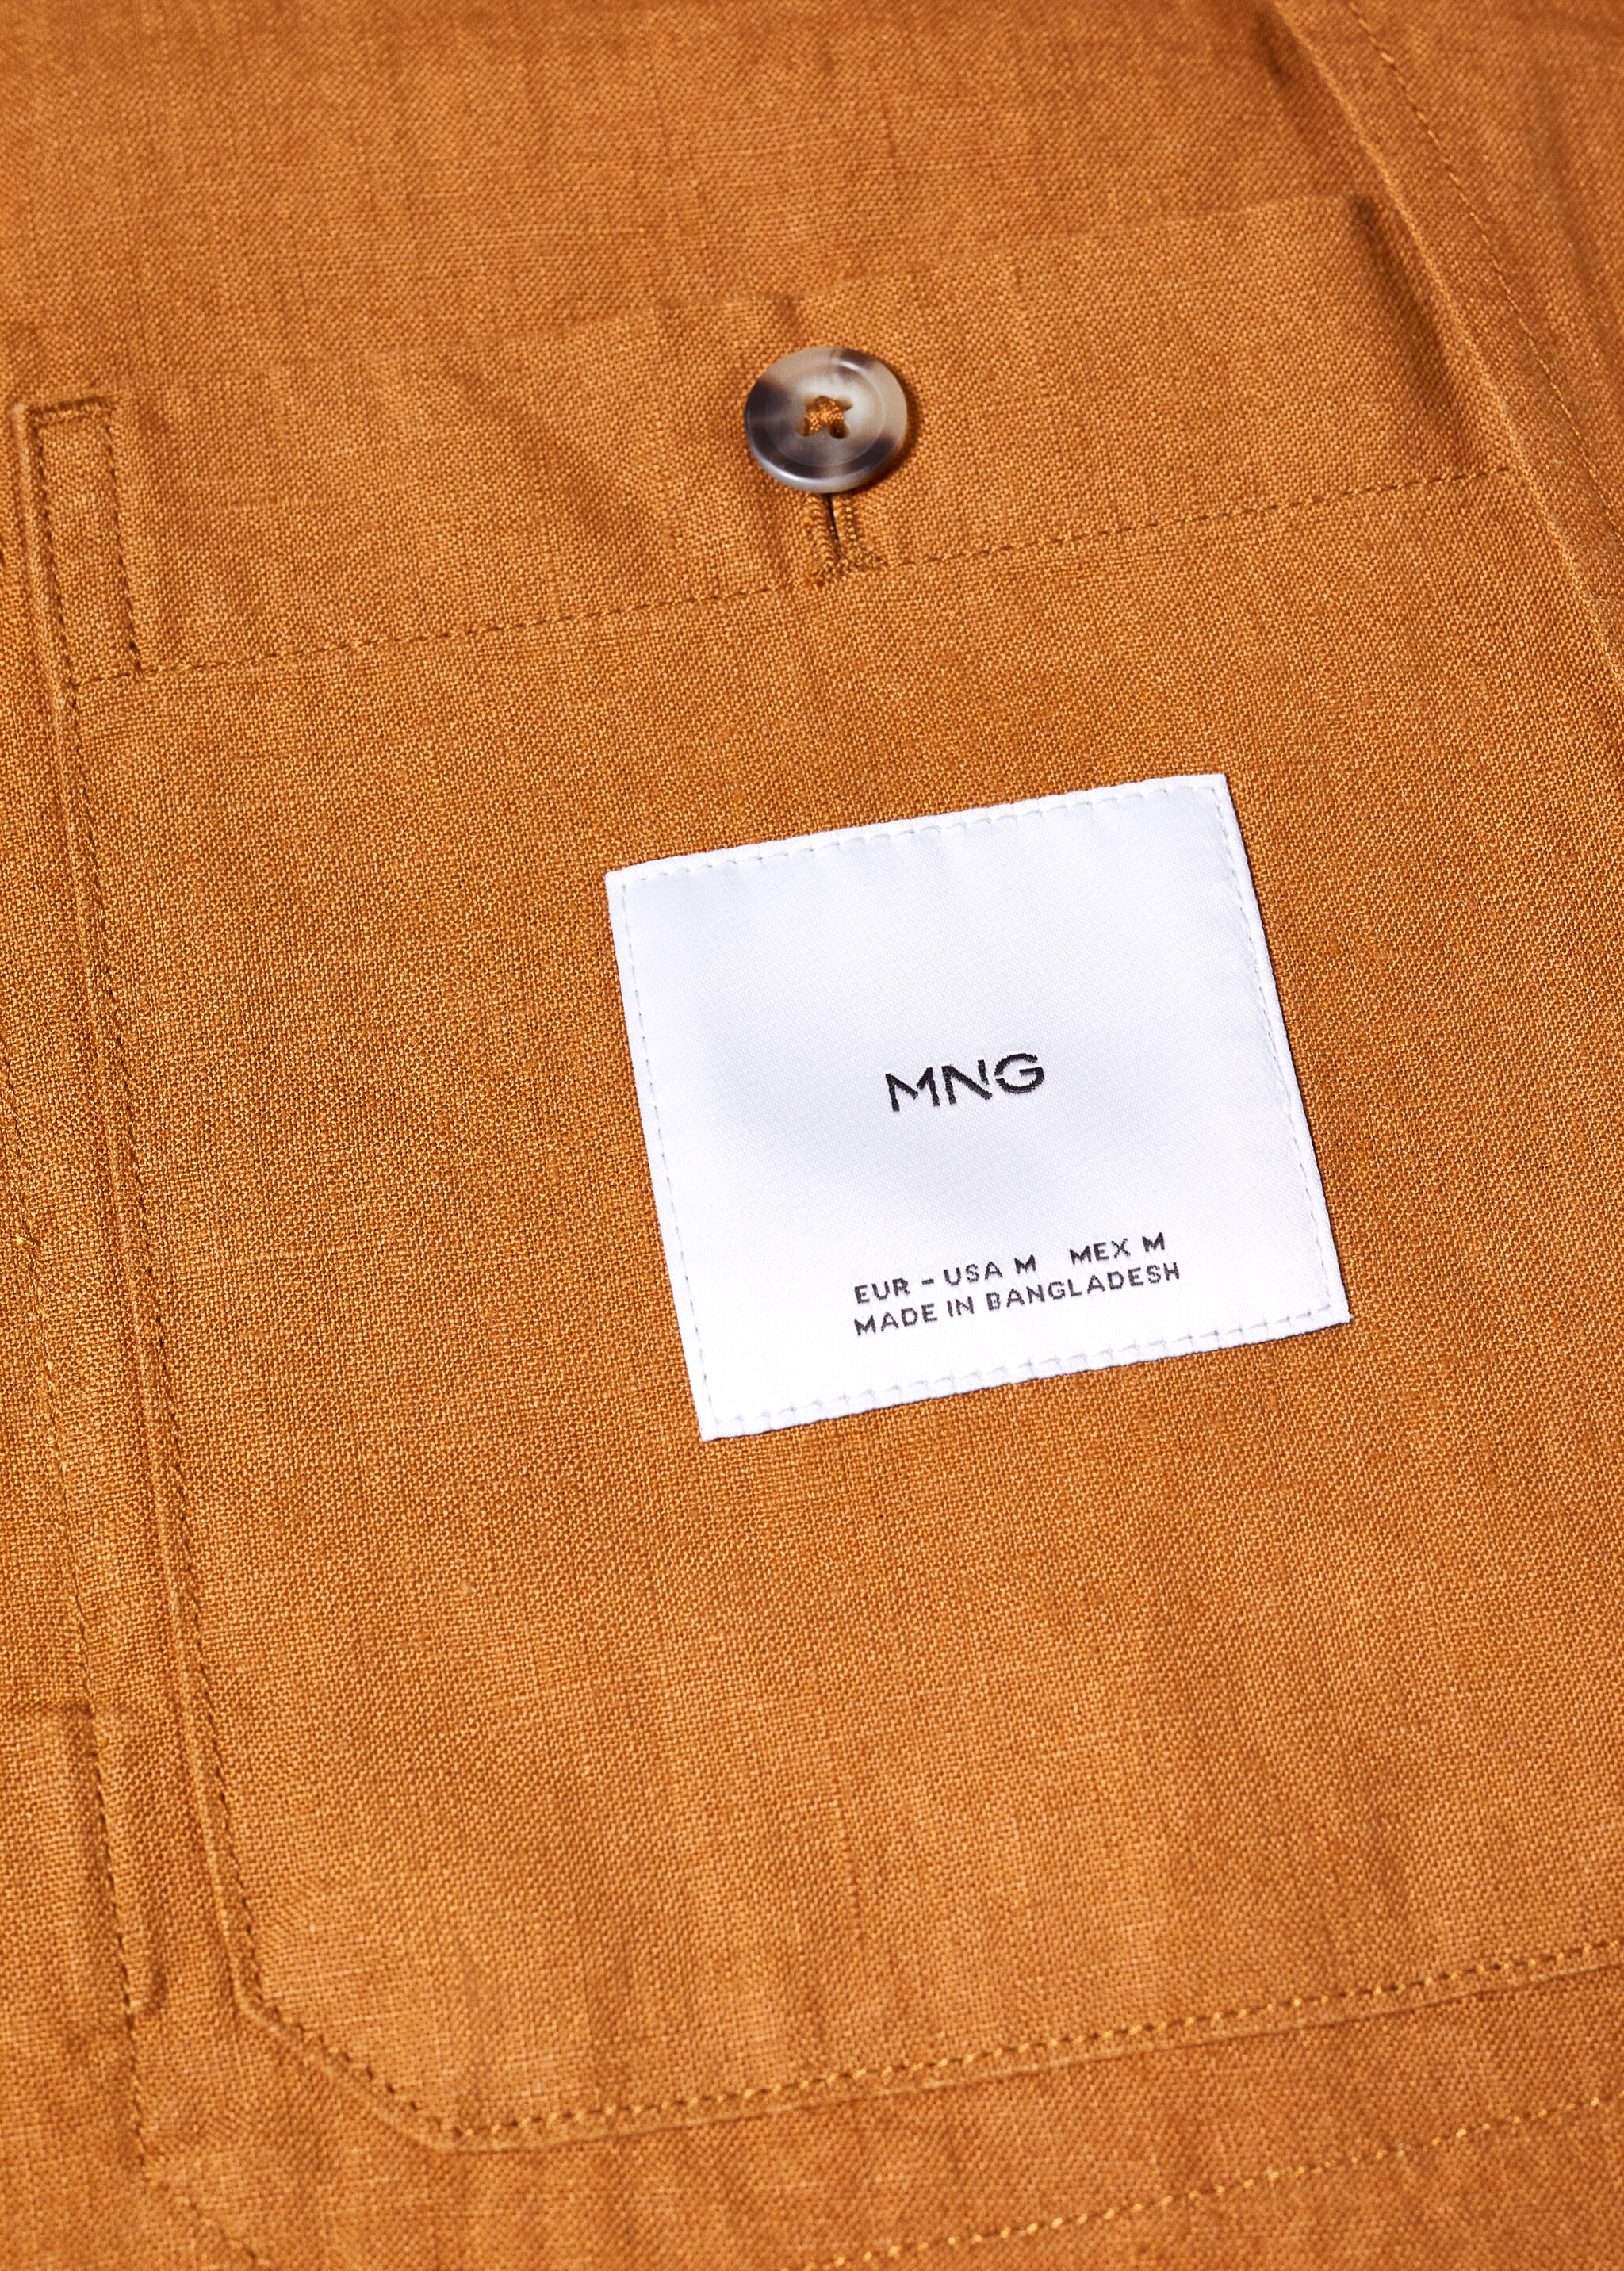 100% linen overshirt with pockets - Details of the article 8